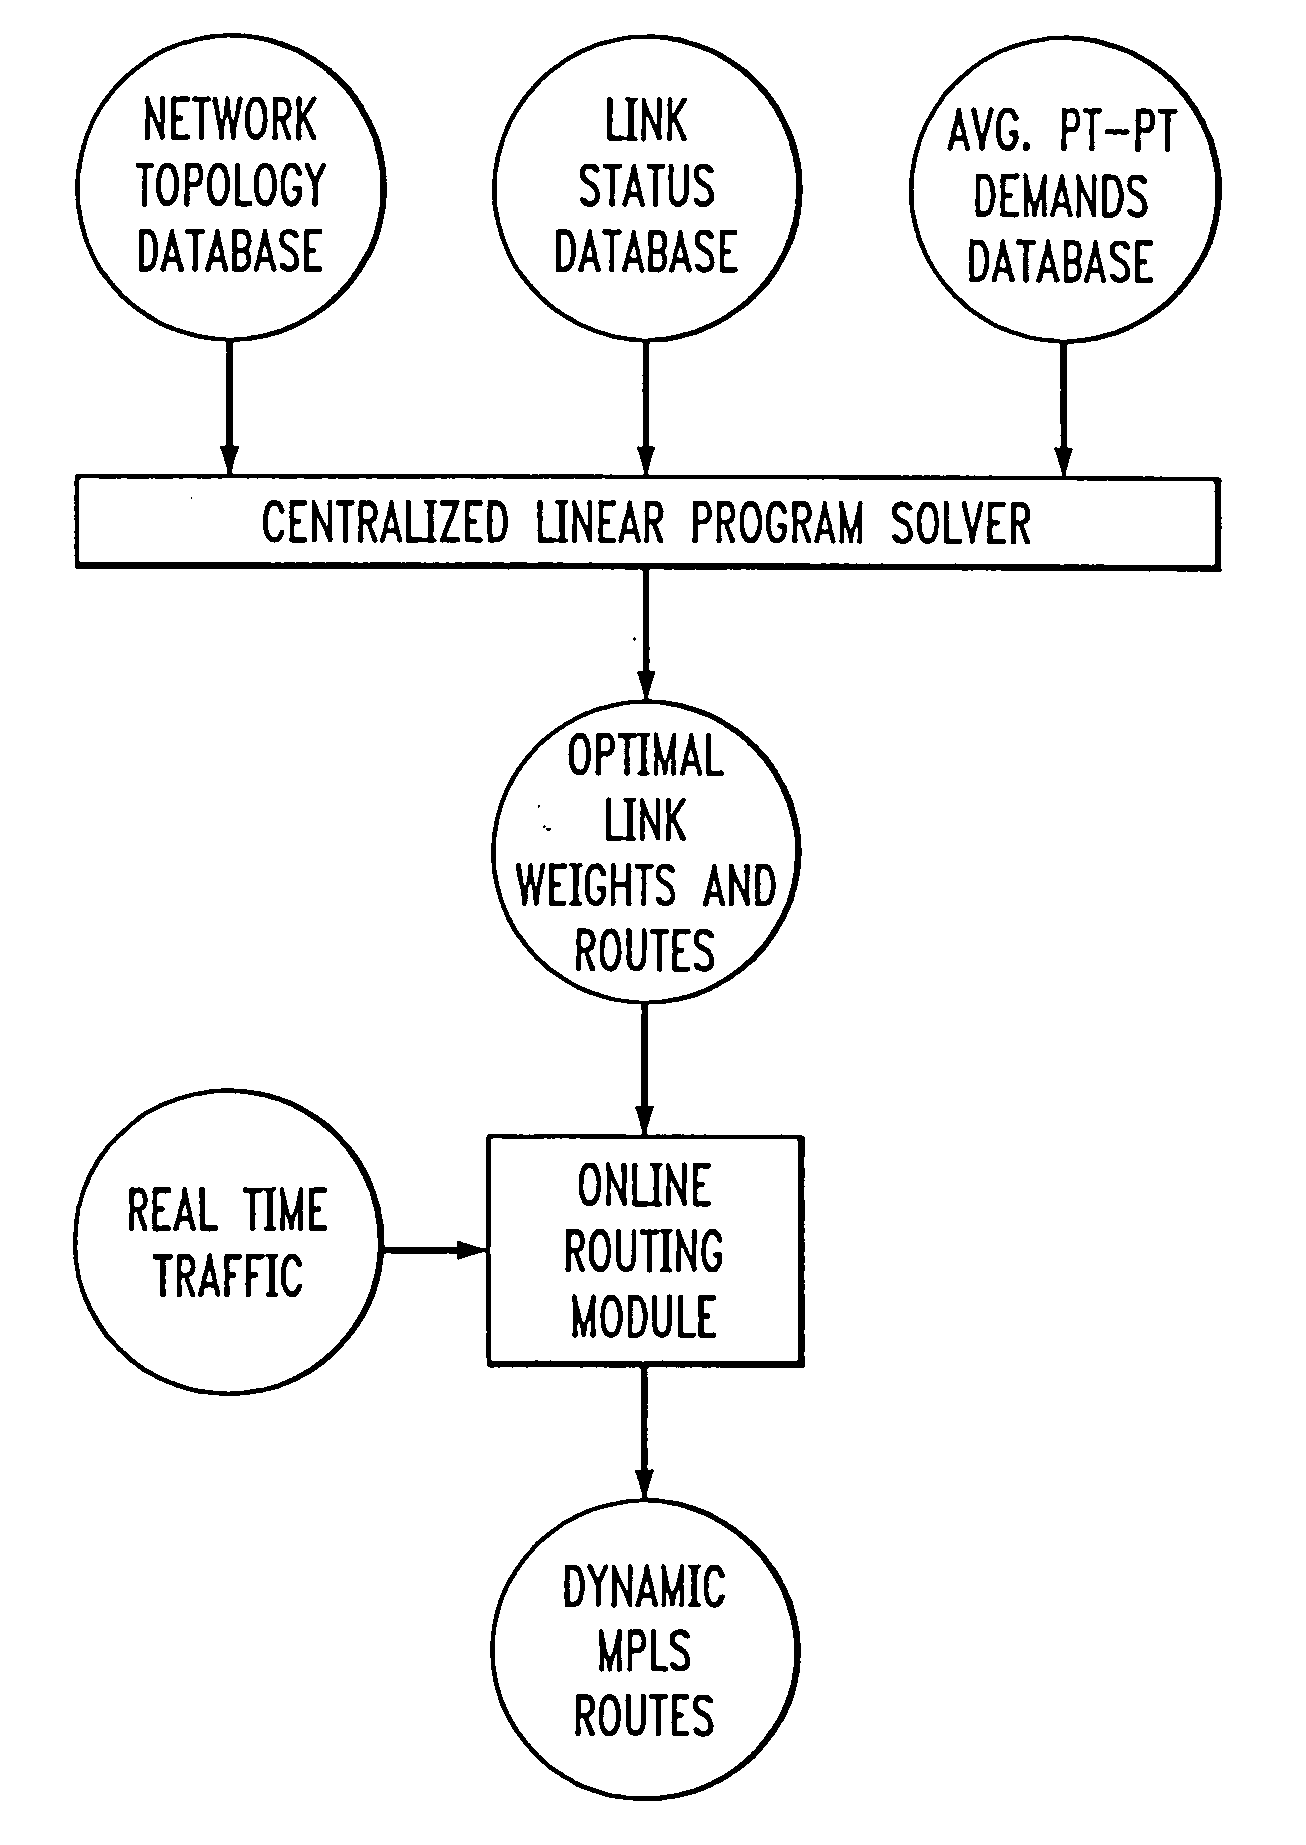 Managing congestion and traffic flow by considering the minimization of link utilization values